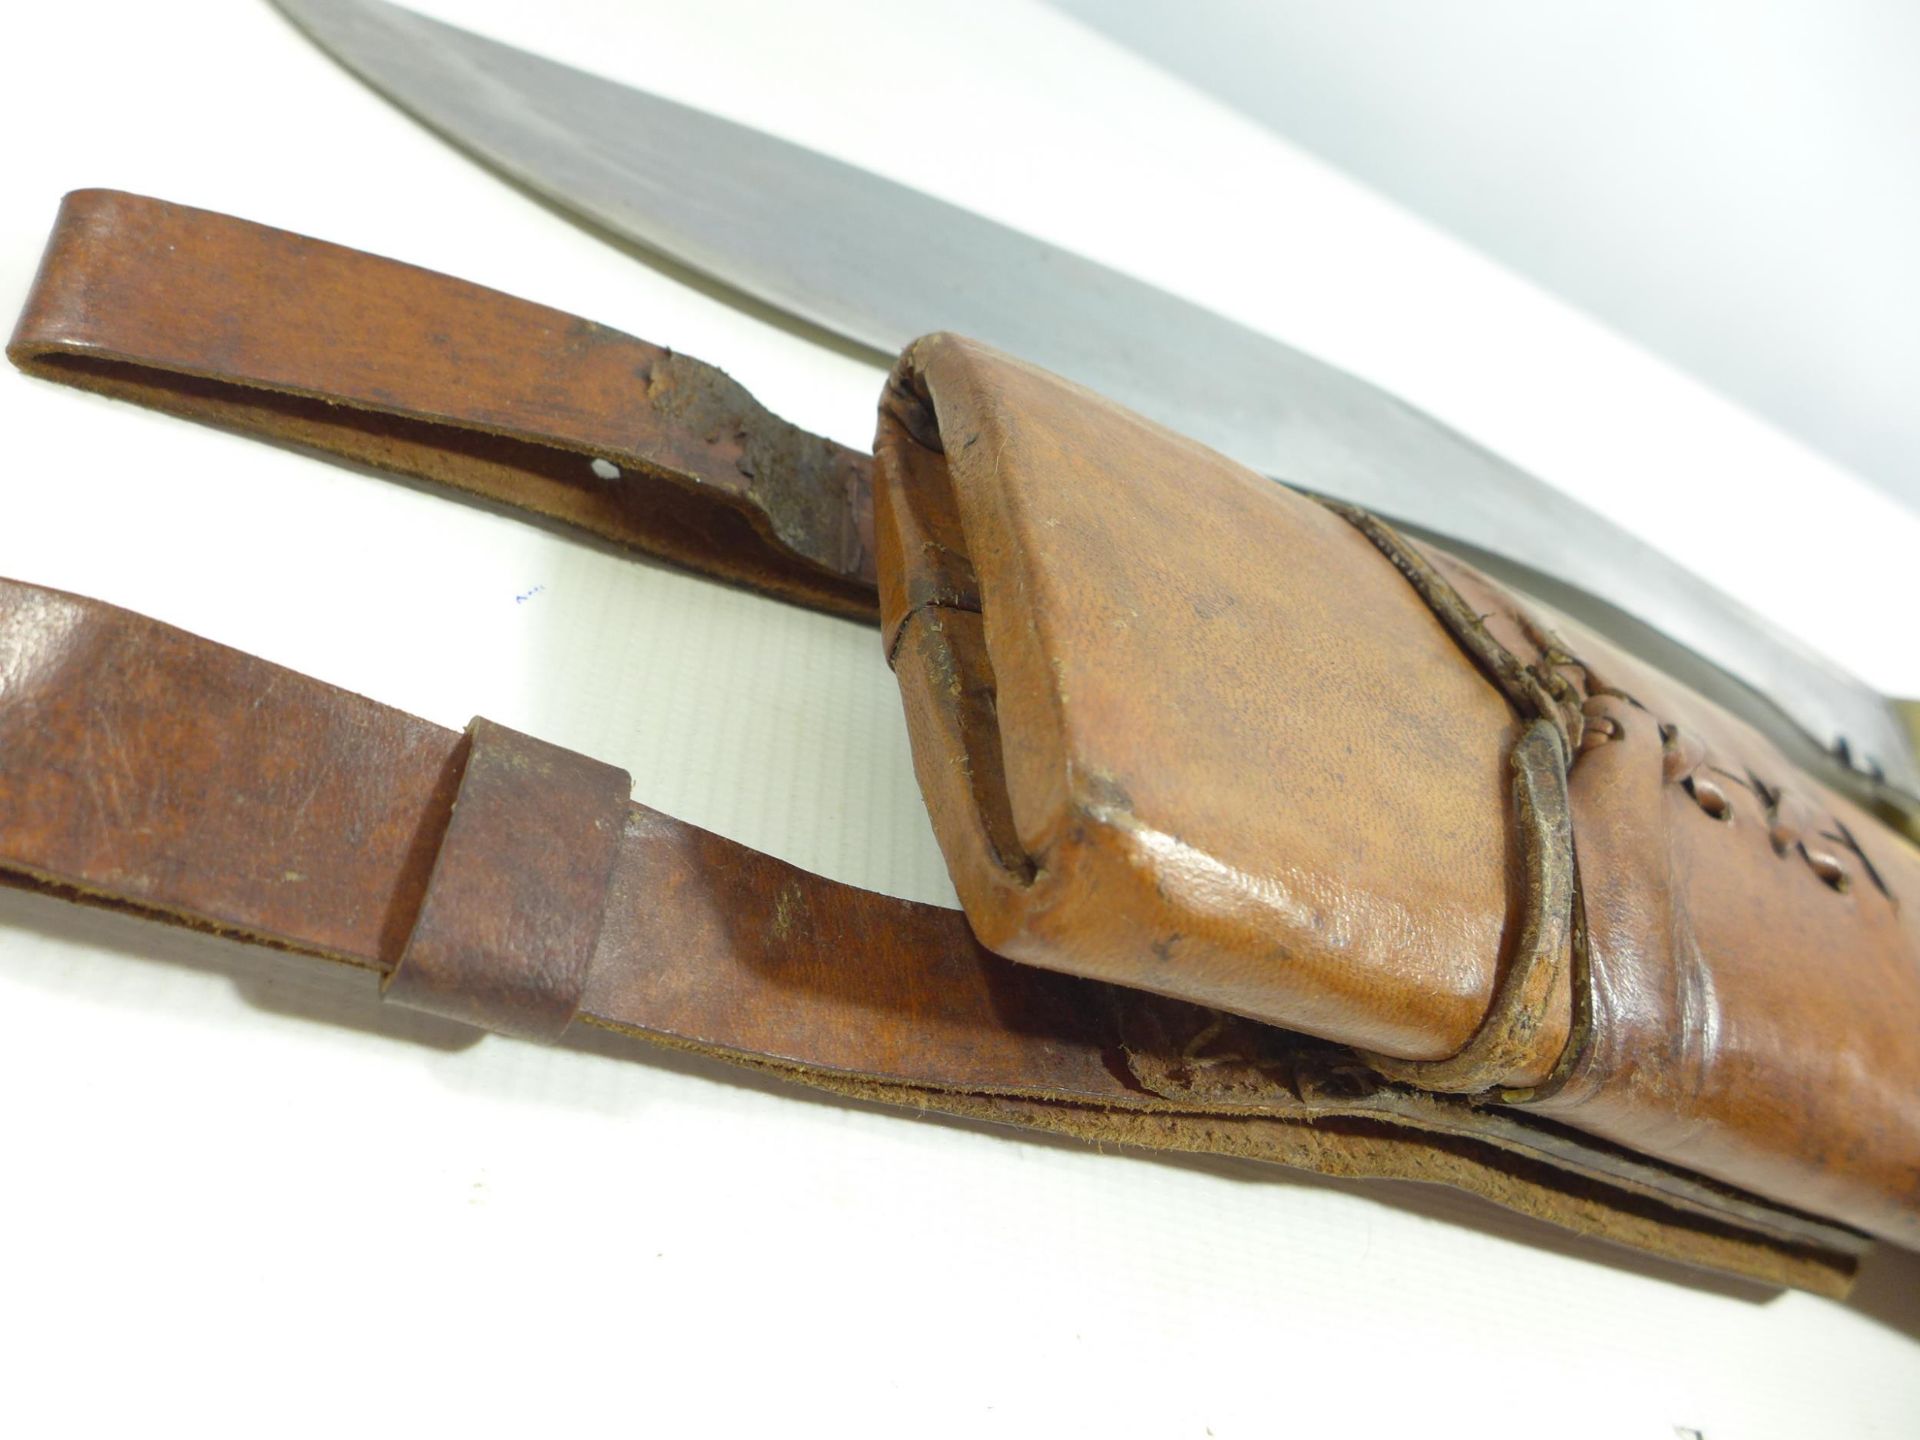 A LARGE KUKRI KNIFE AND SCABBARD, 33CM BLADE STAMPED WITH MILITARY BROAD ARROW AND DATE 1917 - Image 3 of 5